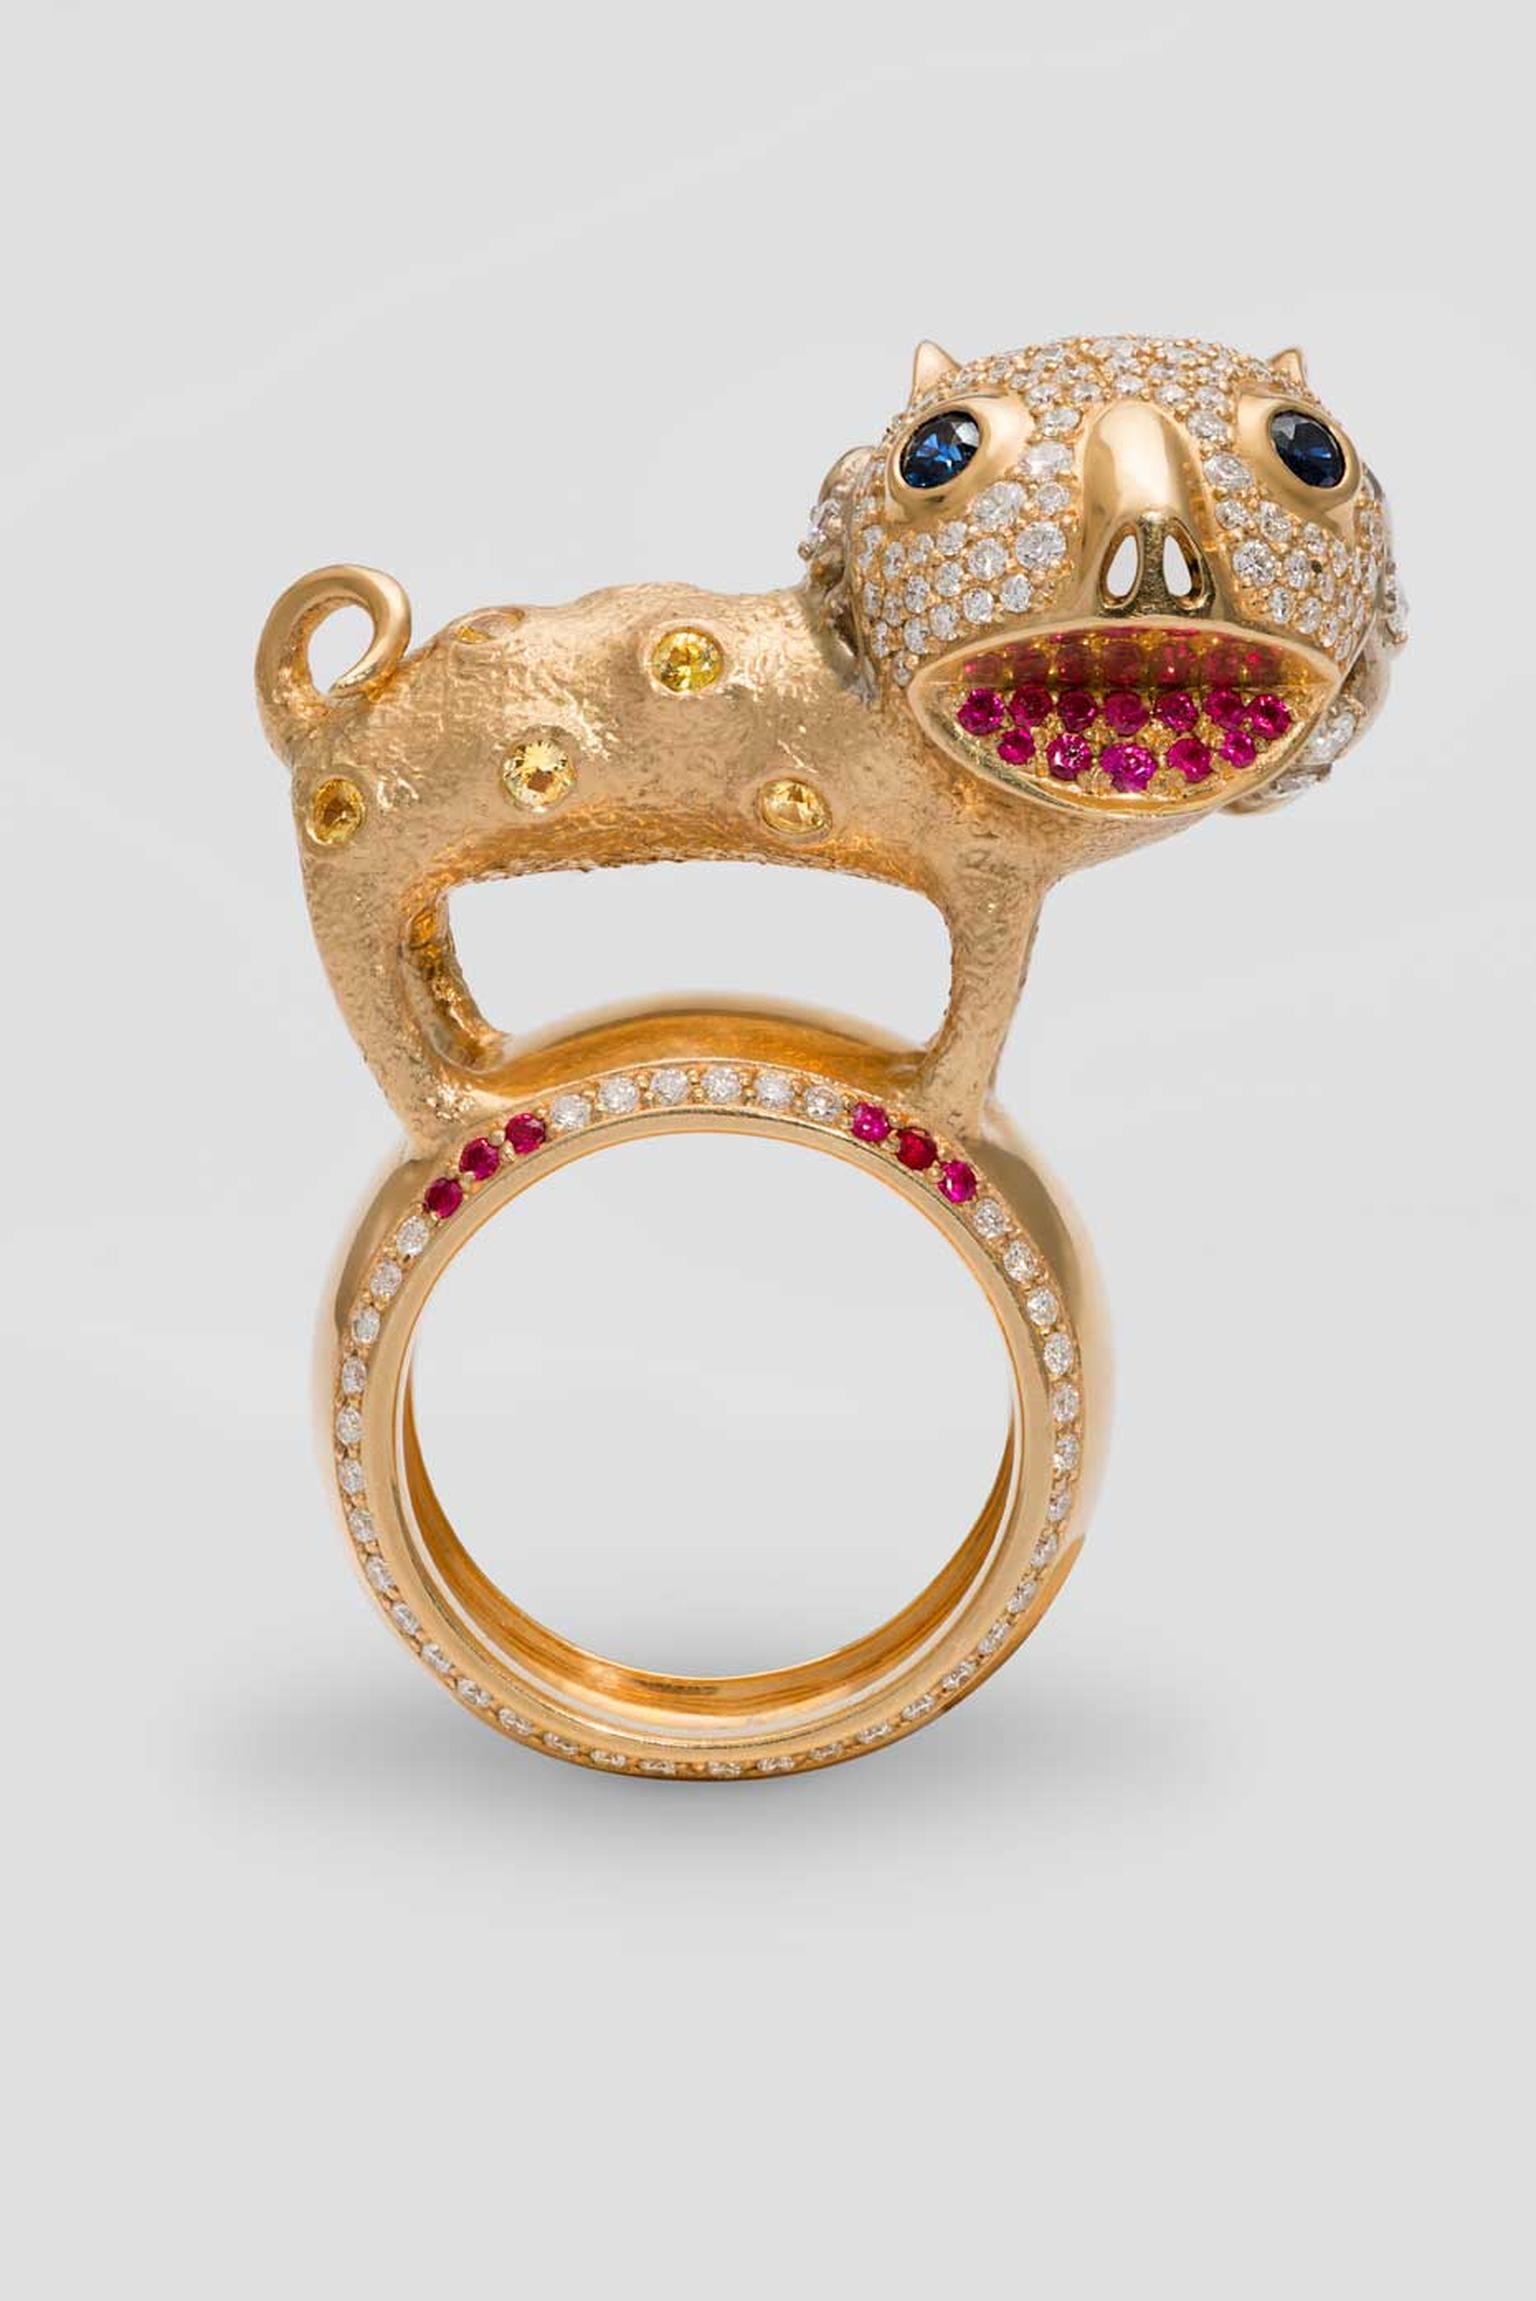 Dashi Namdakov Lion ring in white and yellow gold with diamonds, rubies and sapphires.